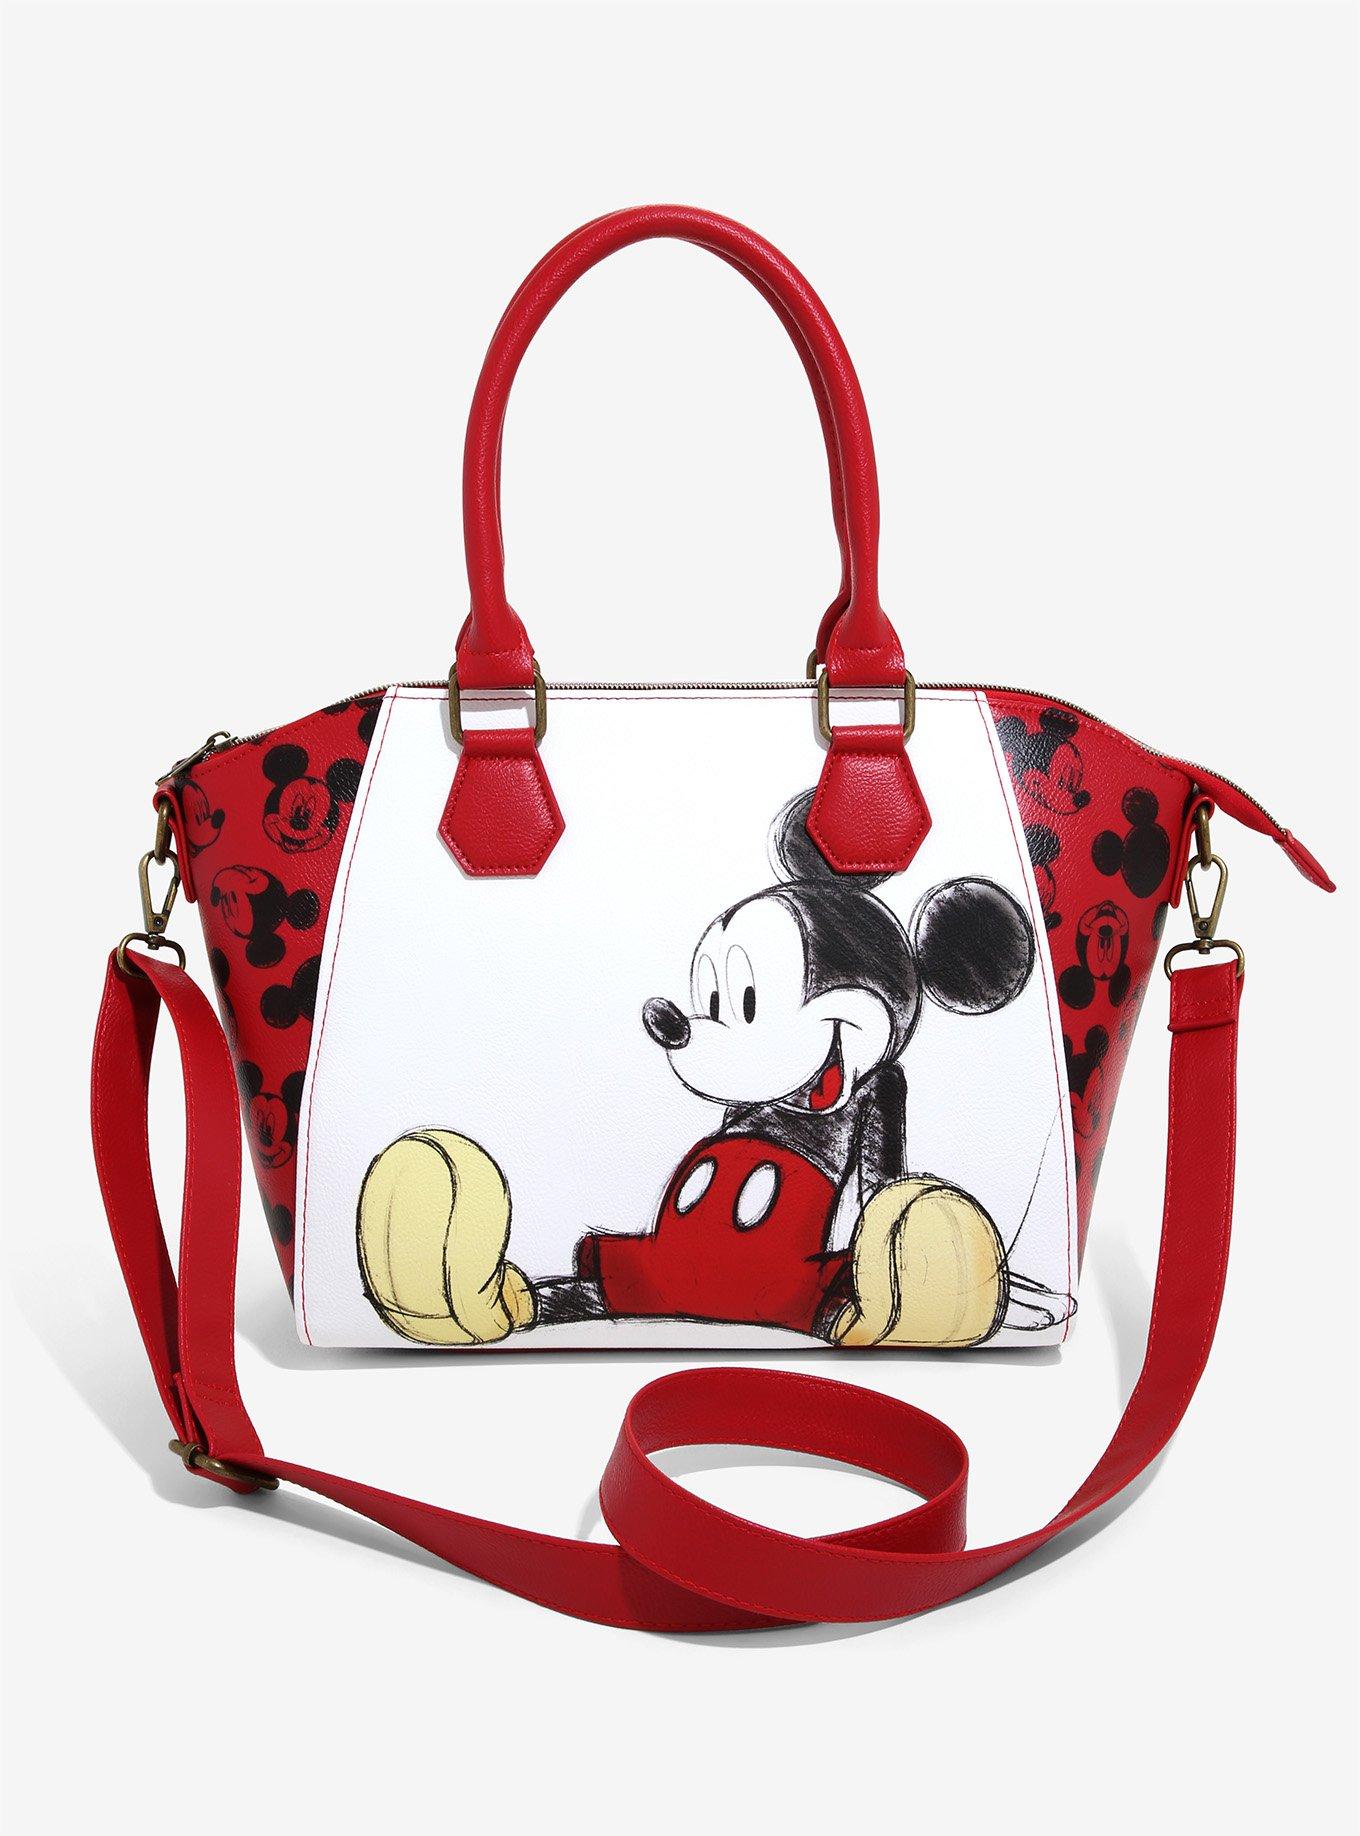 Loungefly Disney Mickey Mouse Sketch Satchel Bag